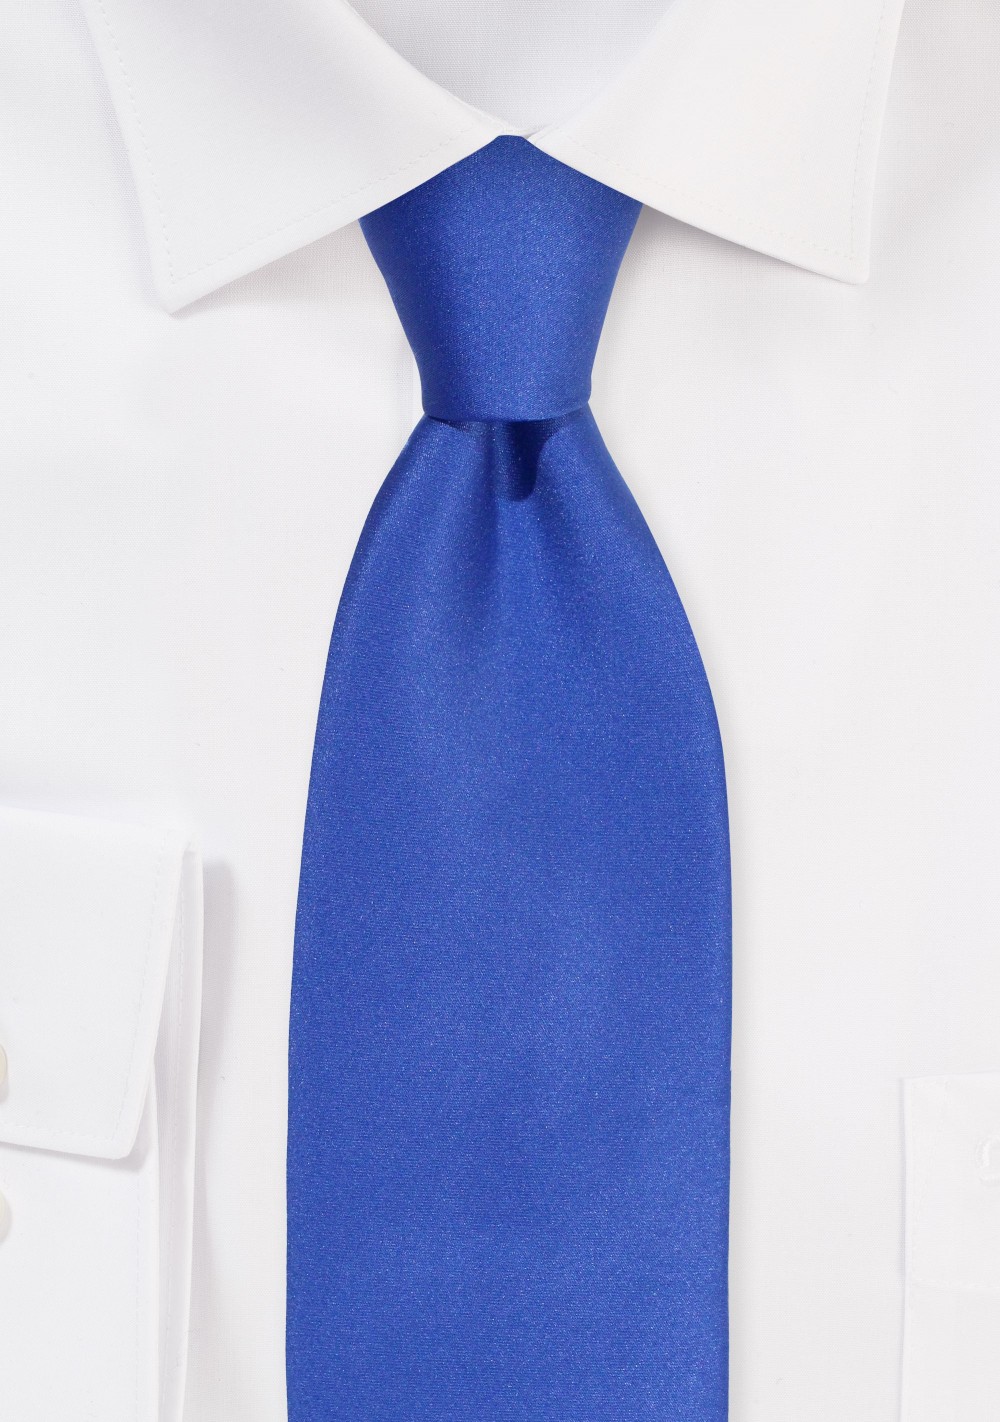 Extra Long Satin Tie in Morning Glory Blue